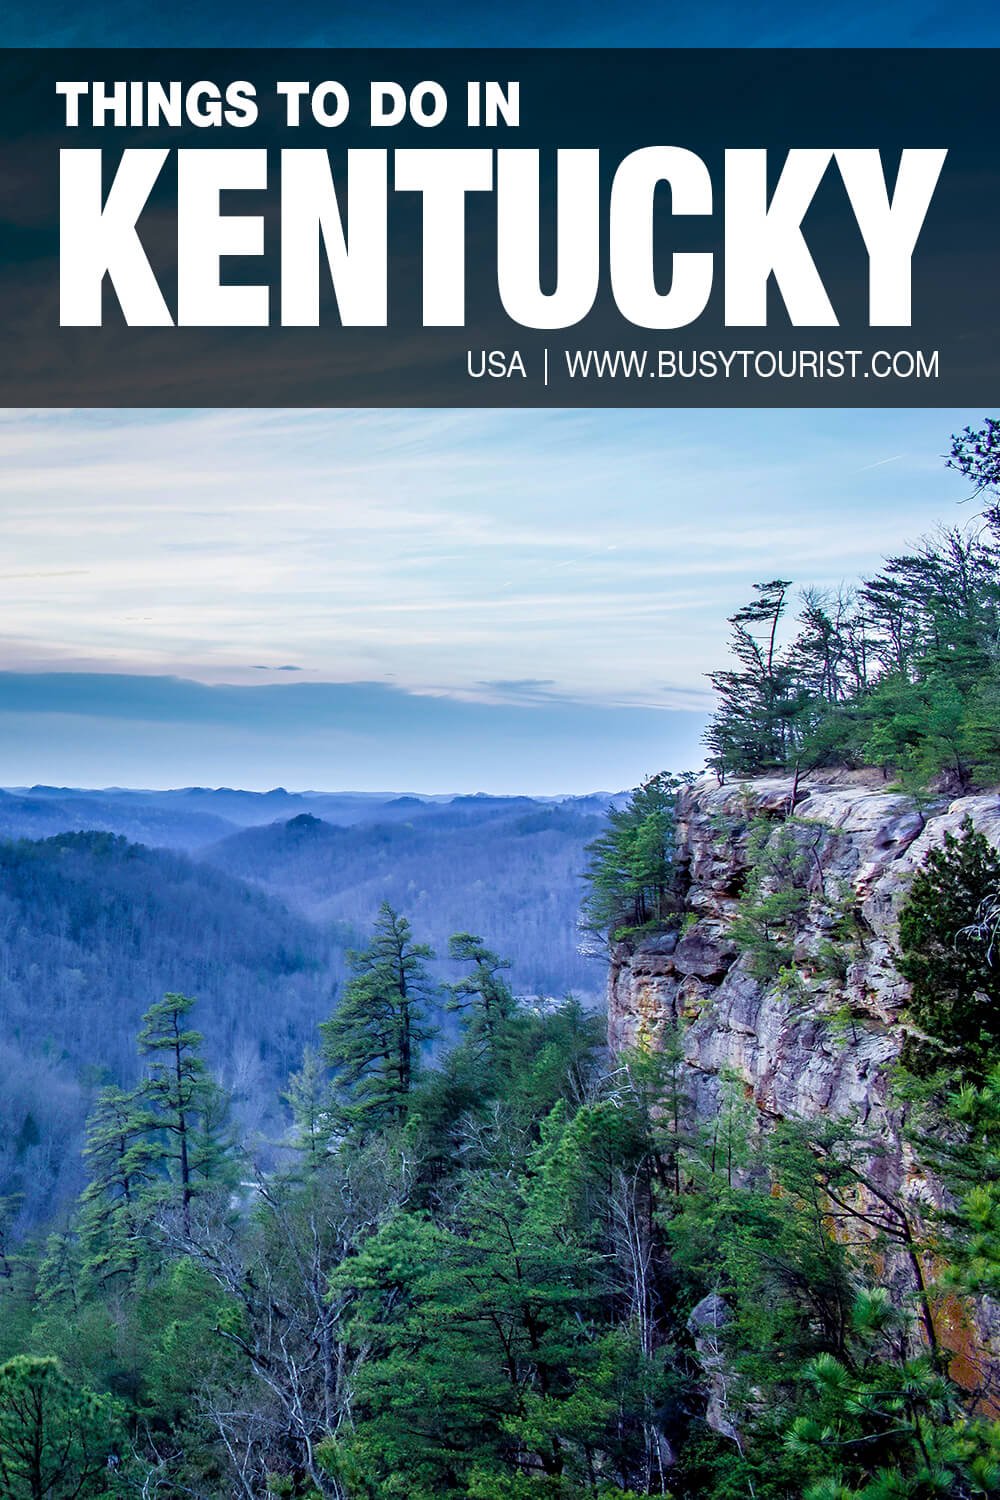 45 Things To Do & Places To Visit In Kentucky Attractions & Activities